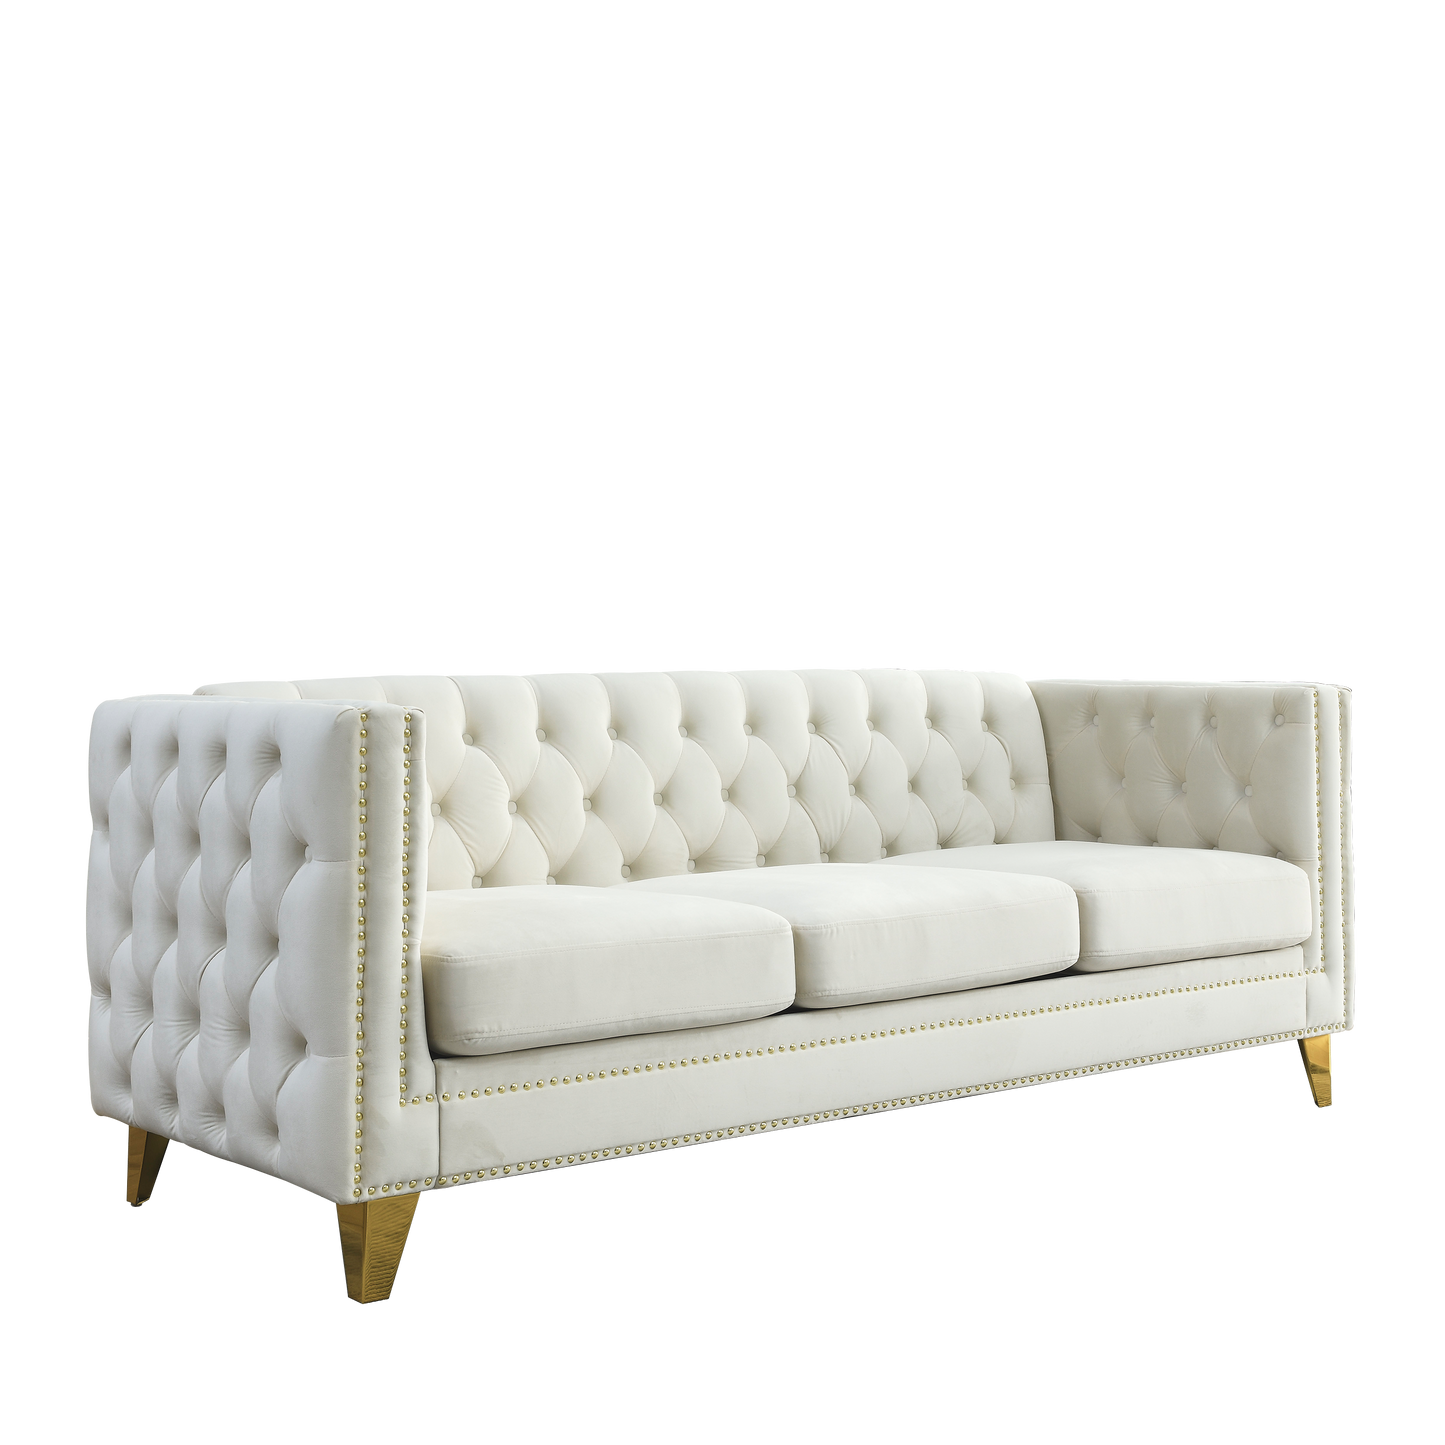 Velvet Sofa for Living Room,Buttons Tufted Square Arm Couch, Modern Couch Upholstered Button and Metal Legs, Sofa Couch for Bedroom, Beige Velvet ,2PCS